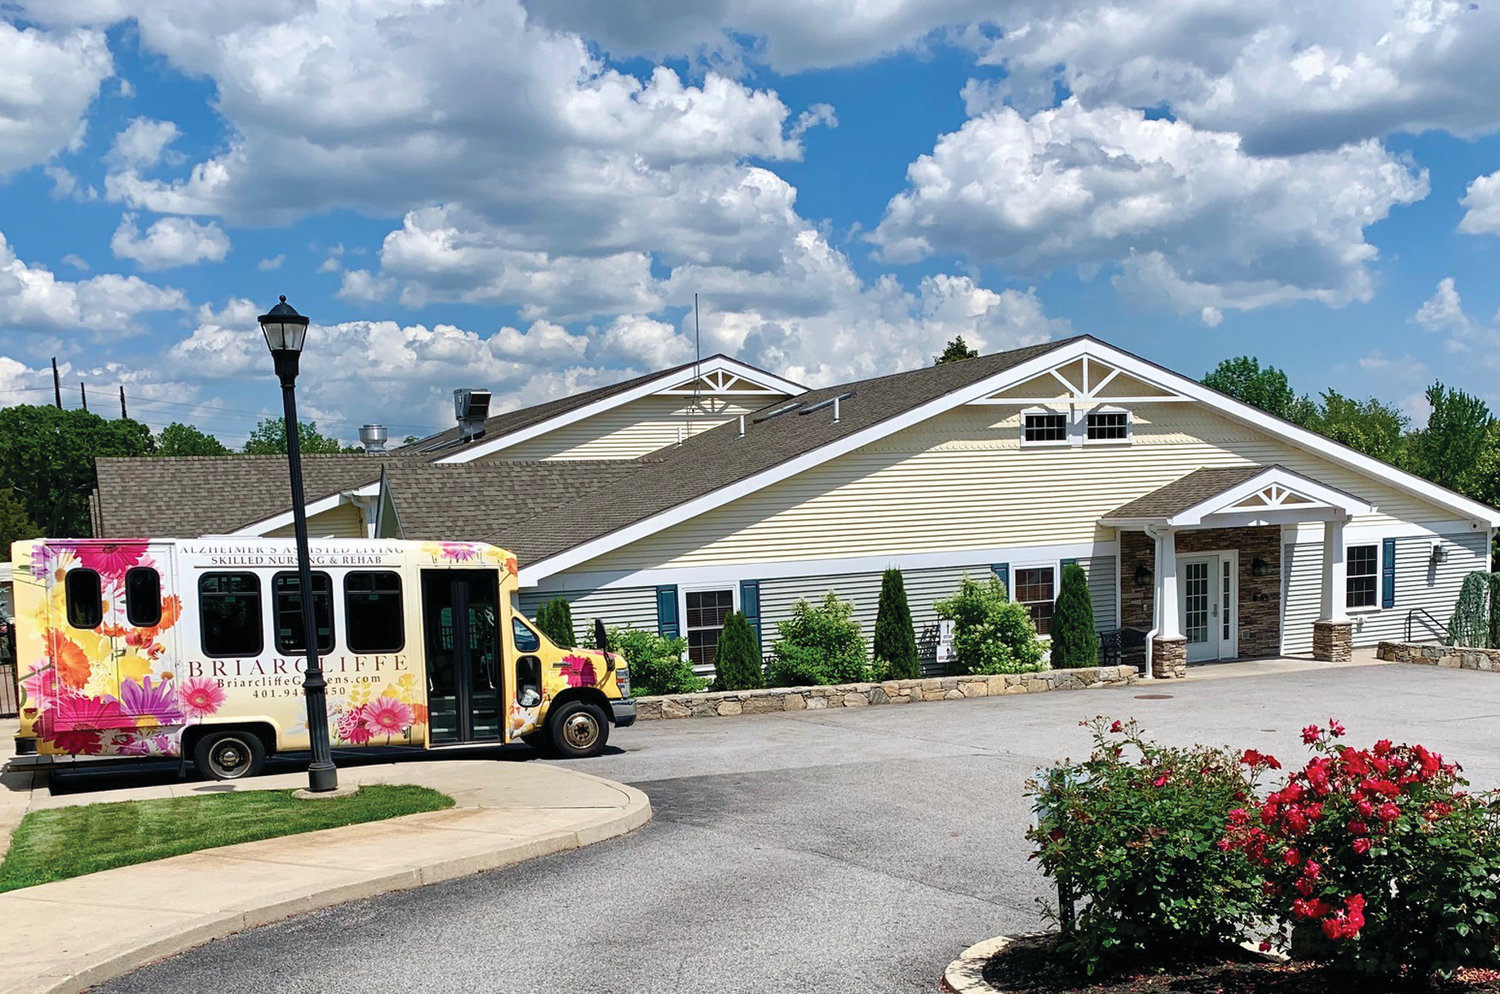 This state-of-the-art Memory Care Assisted Living Residence in Johnston provides compassionate care to those with Alzheimer’s Disease, dementia and other memory-loss conditions.